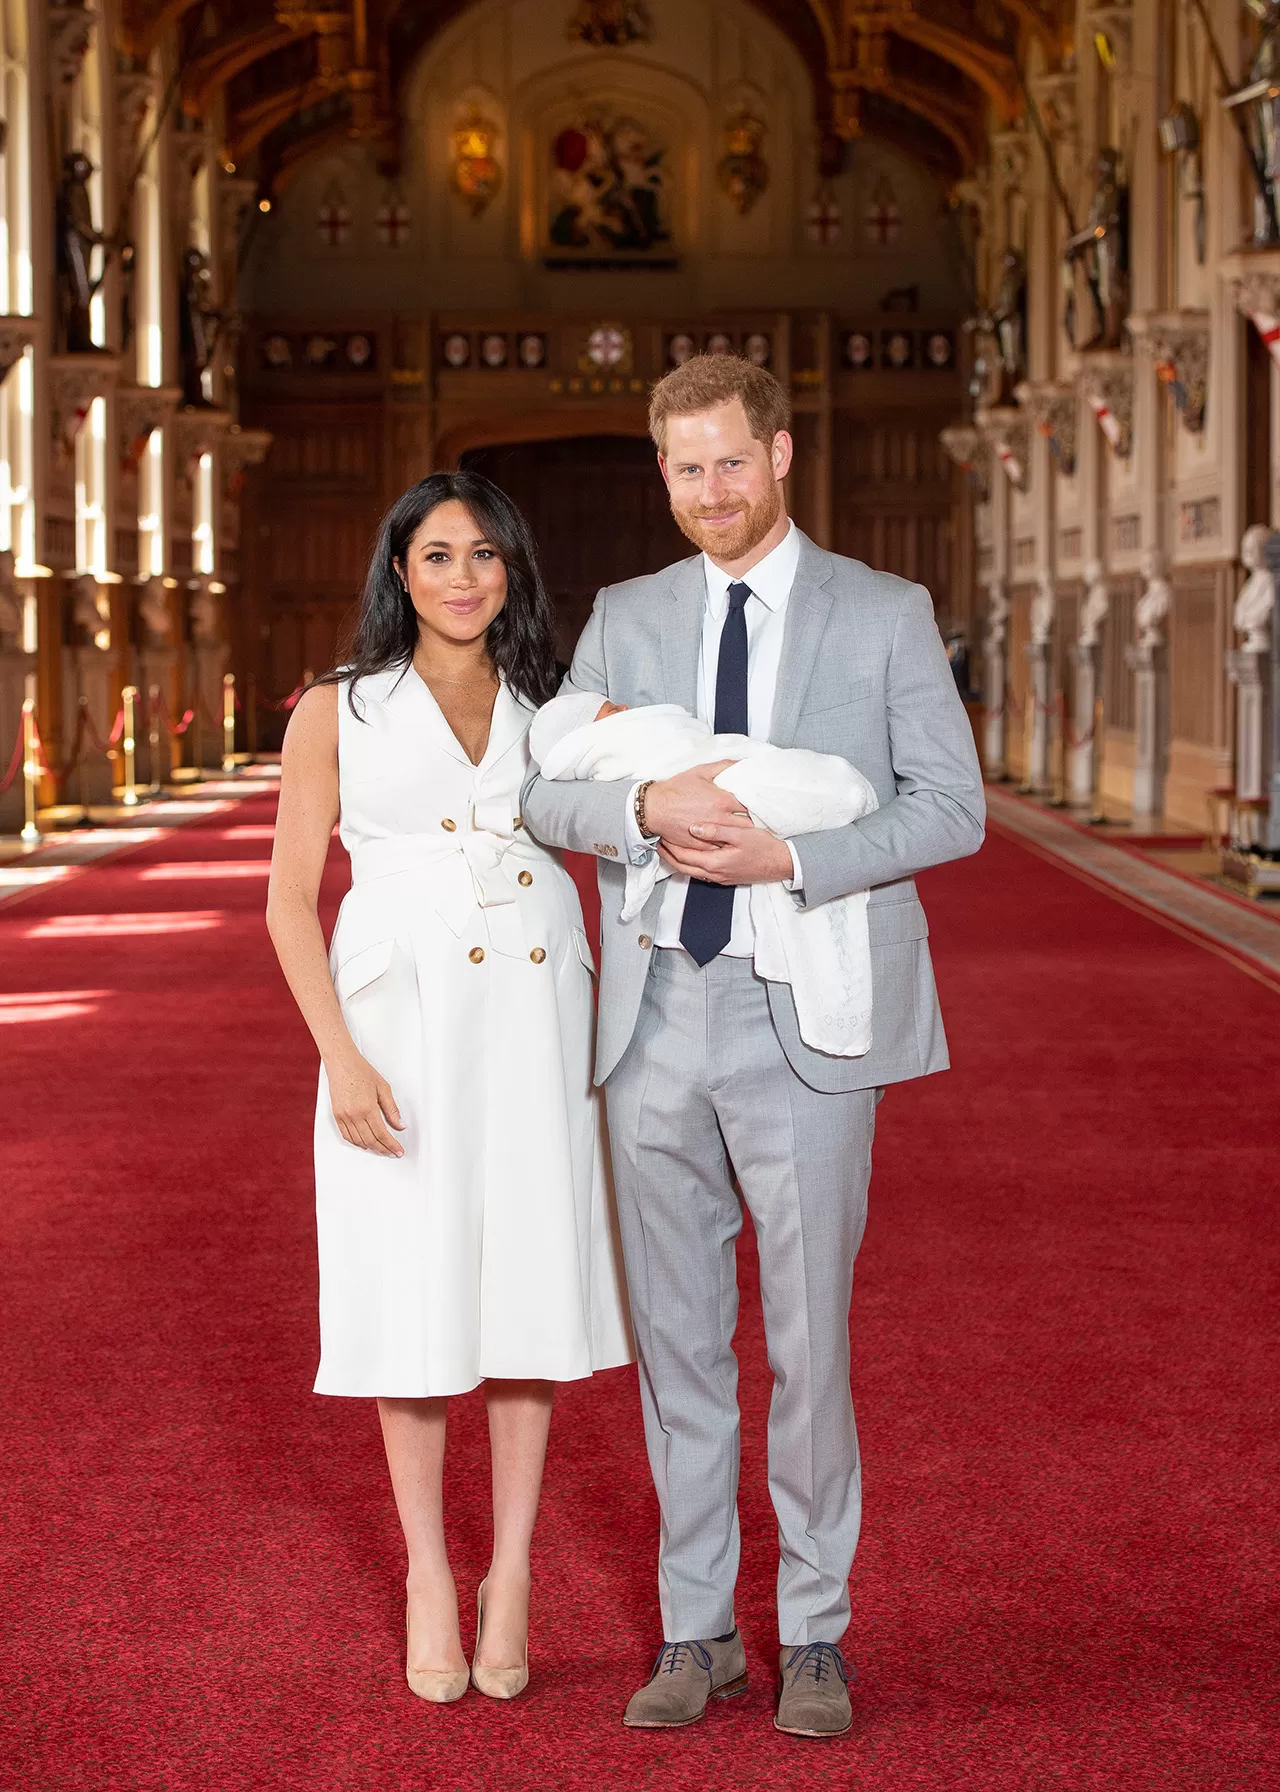 Welcome to the world Royal Baby Sussex: 9 baby-friendly activities for other new parents